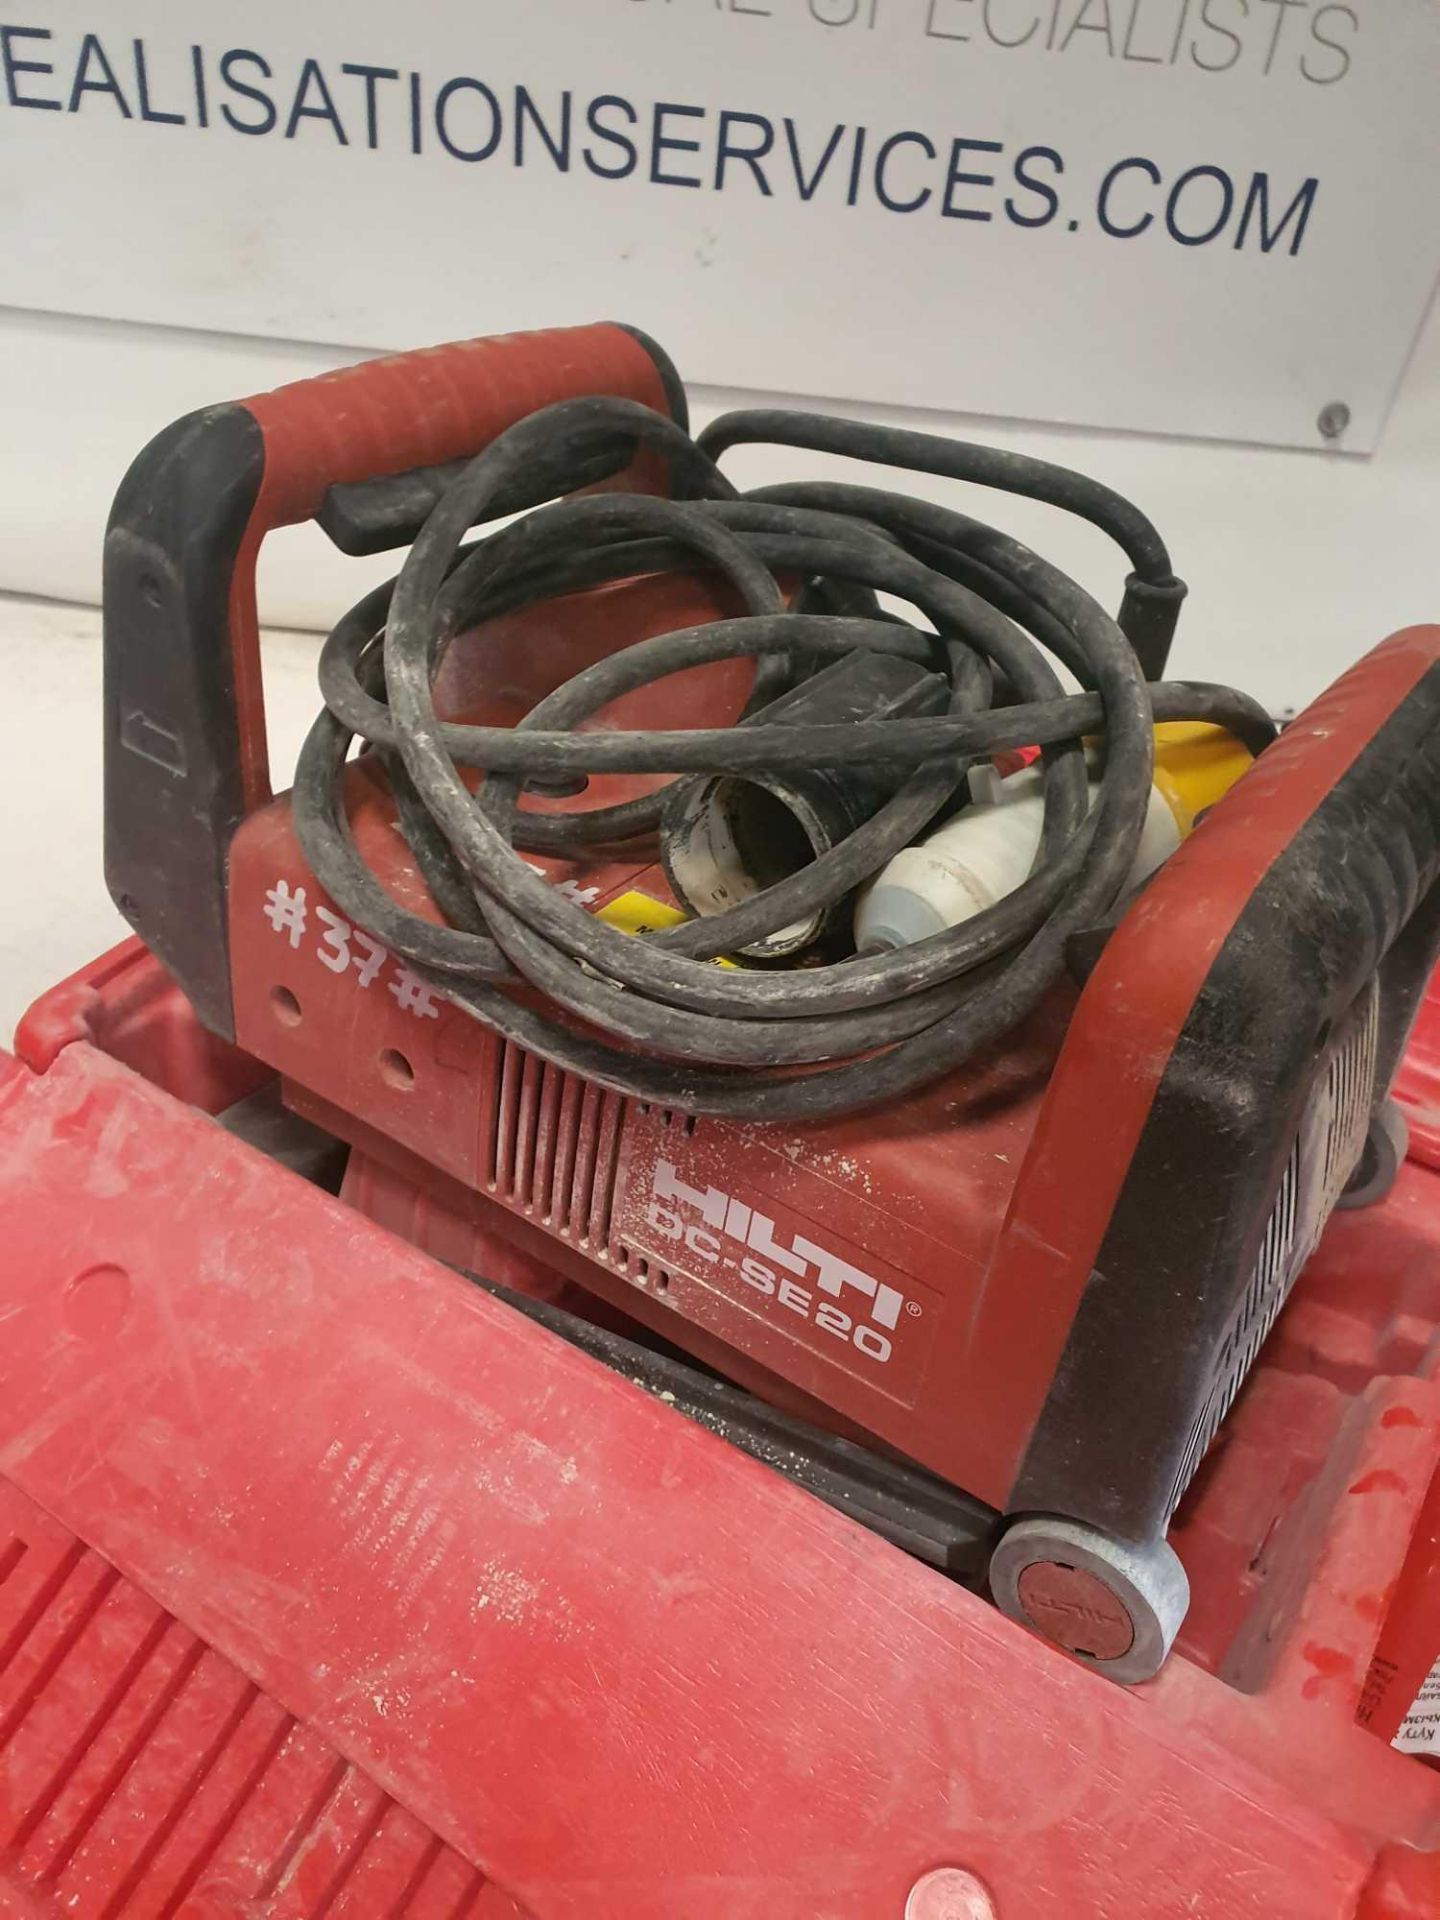 Hilti wall chaser 110v - Image 4 of 4